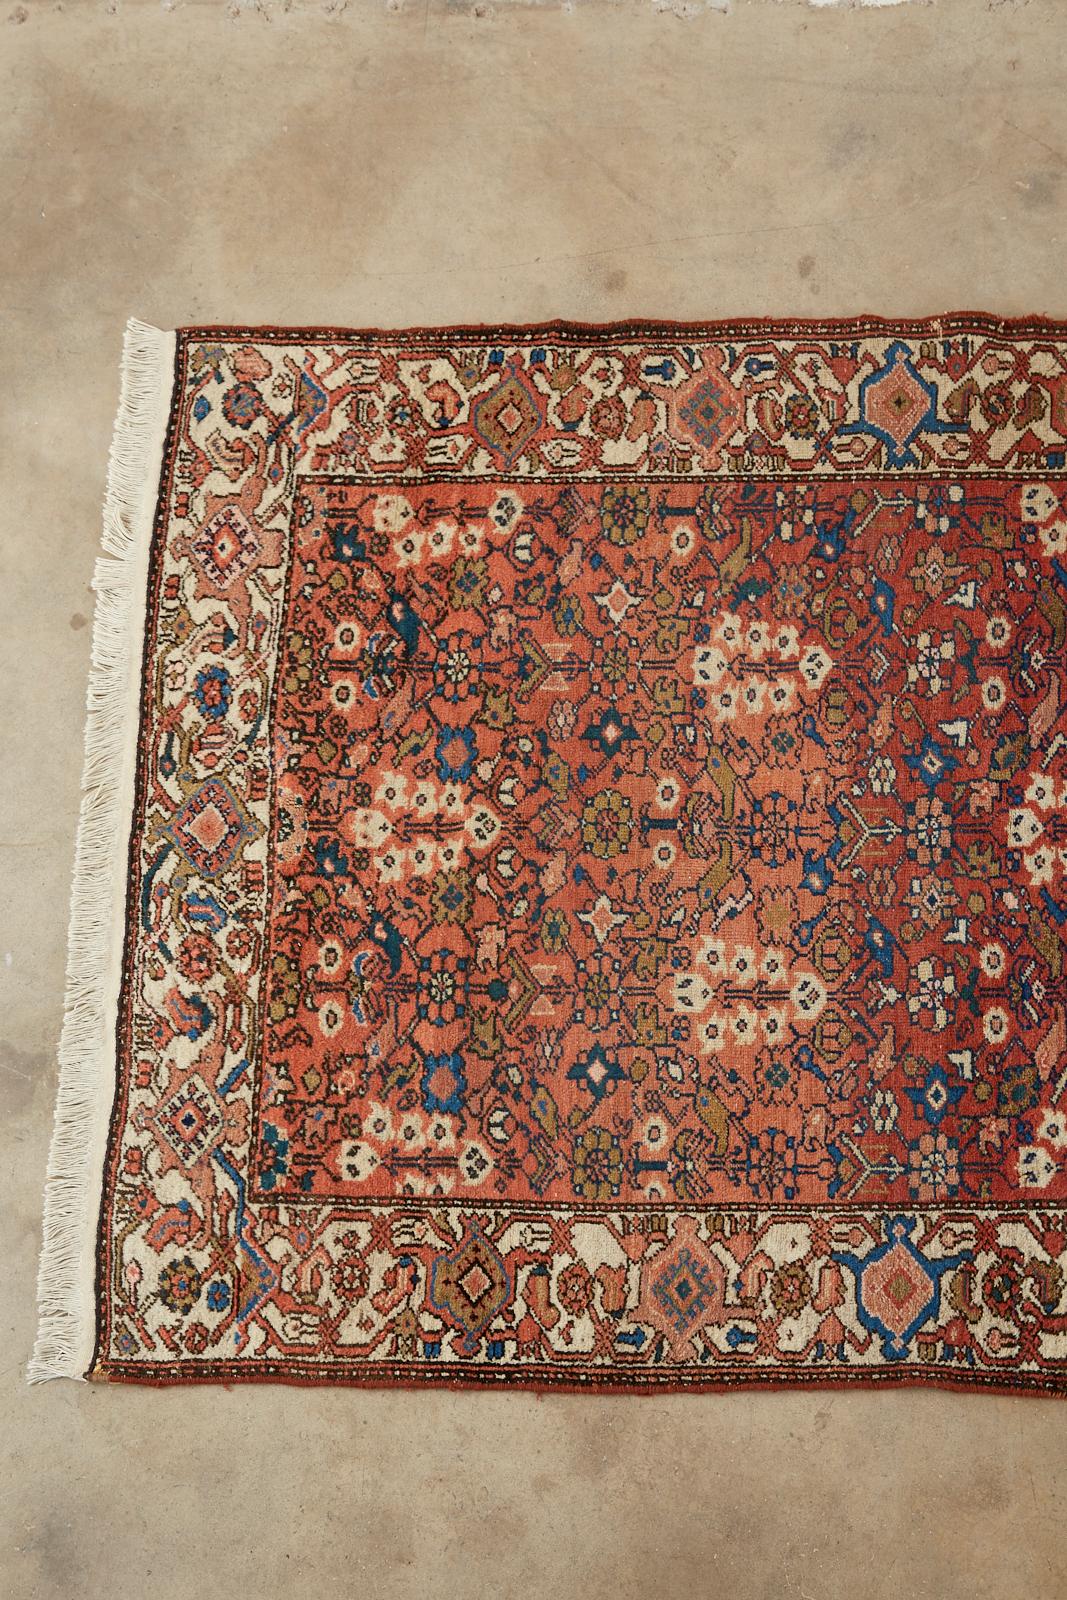 Stylish early 20th century antique Persian Malayer rug features hand knotted wool with a cotton warp. Beautiful age with abrash. The field varies different shades of jewel tone reds from pinks to garnet. Decorated with light hyacinth flowers and